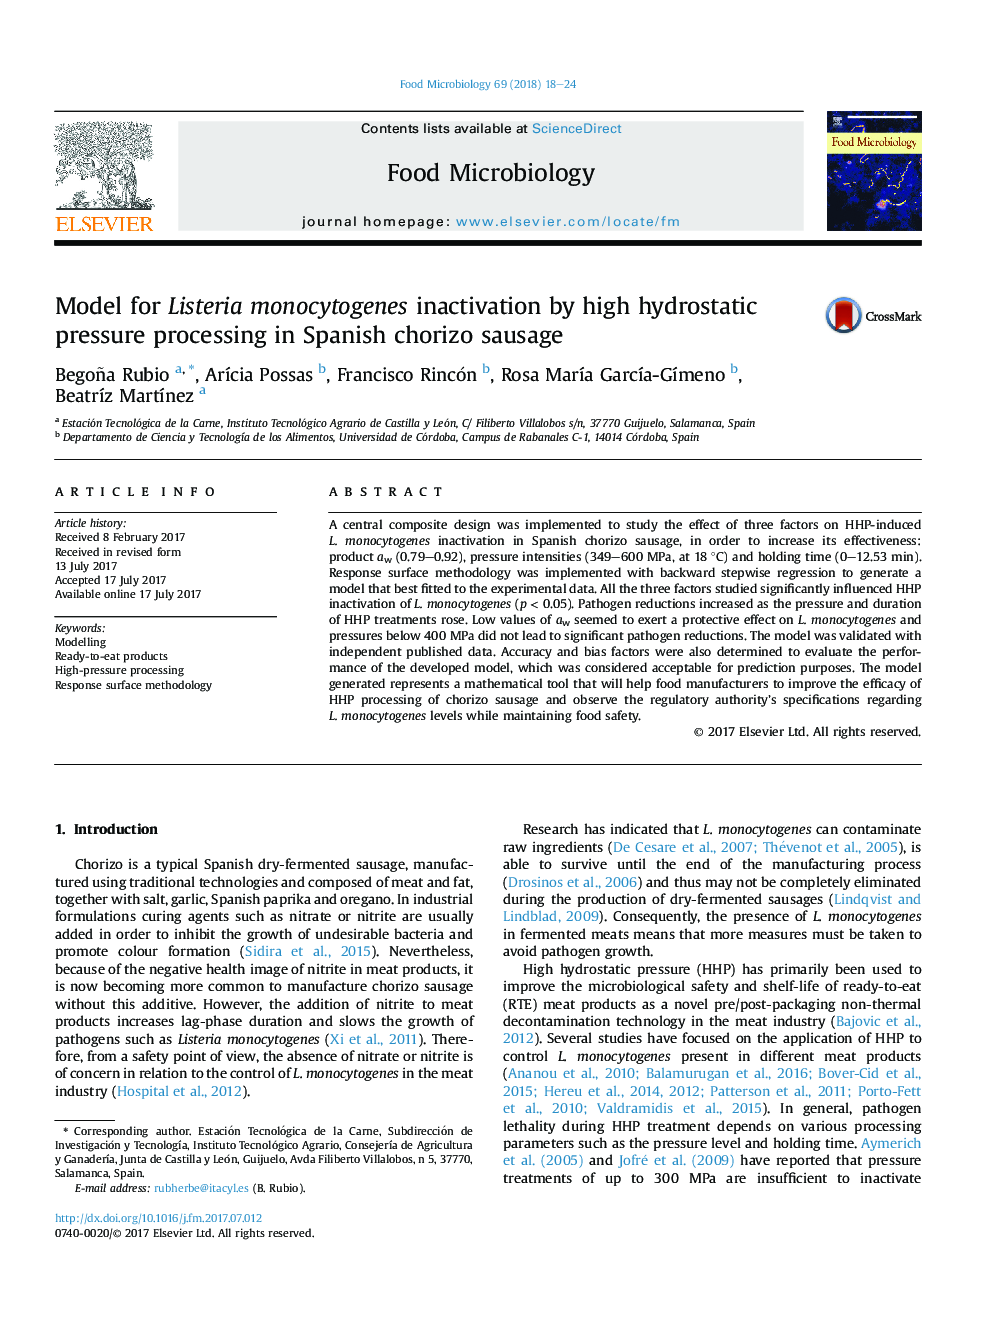 Model for Listeria monocytogenes inactivation by high hydrostatic pressure processing in Spanish chorizo sausage